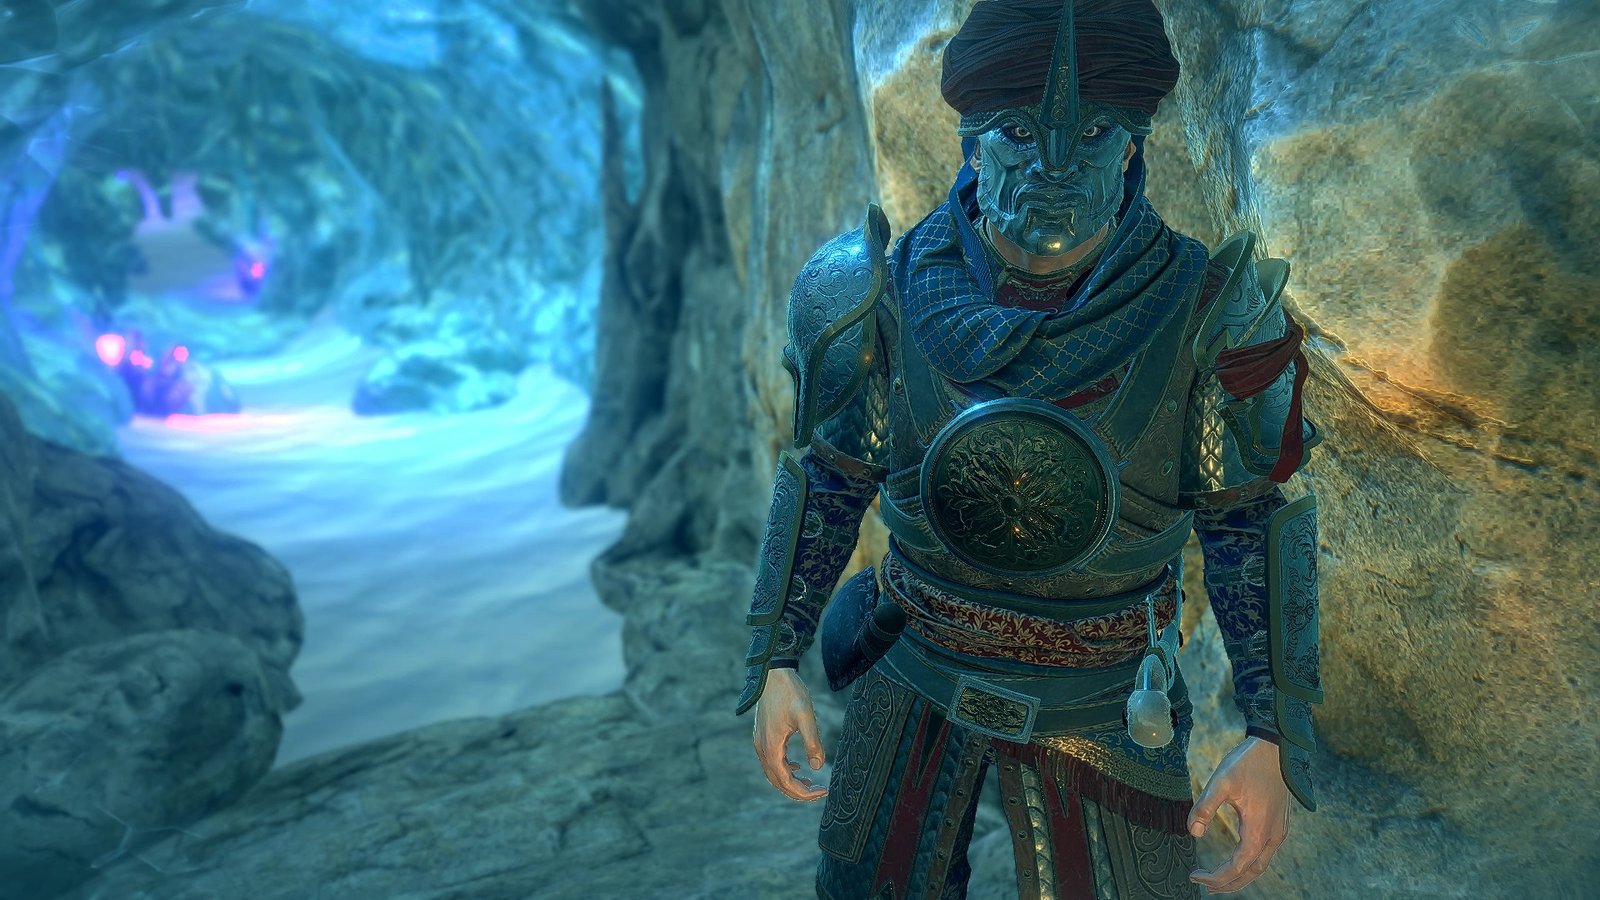 man in metal mask with ornate armor standing to the right in an icy cave